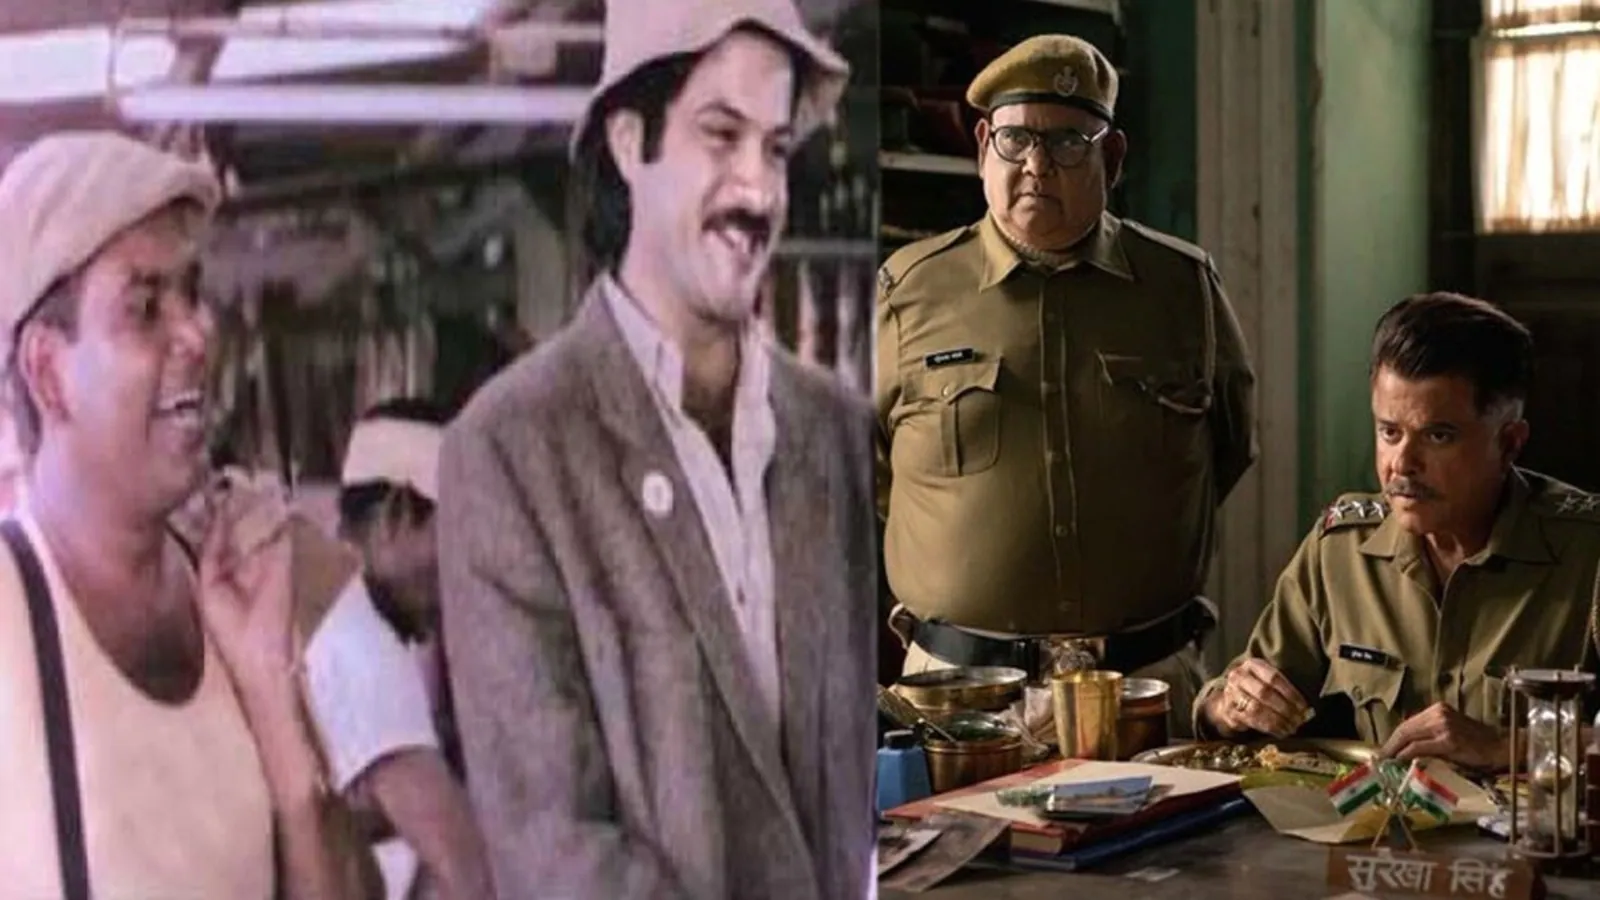 Anil Kapoor recalls 40 years of friendship awith Satish Kaushik in birthday note for him. See post